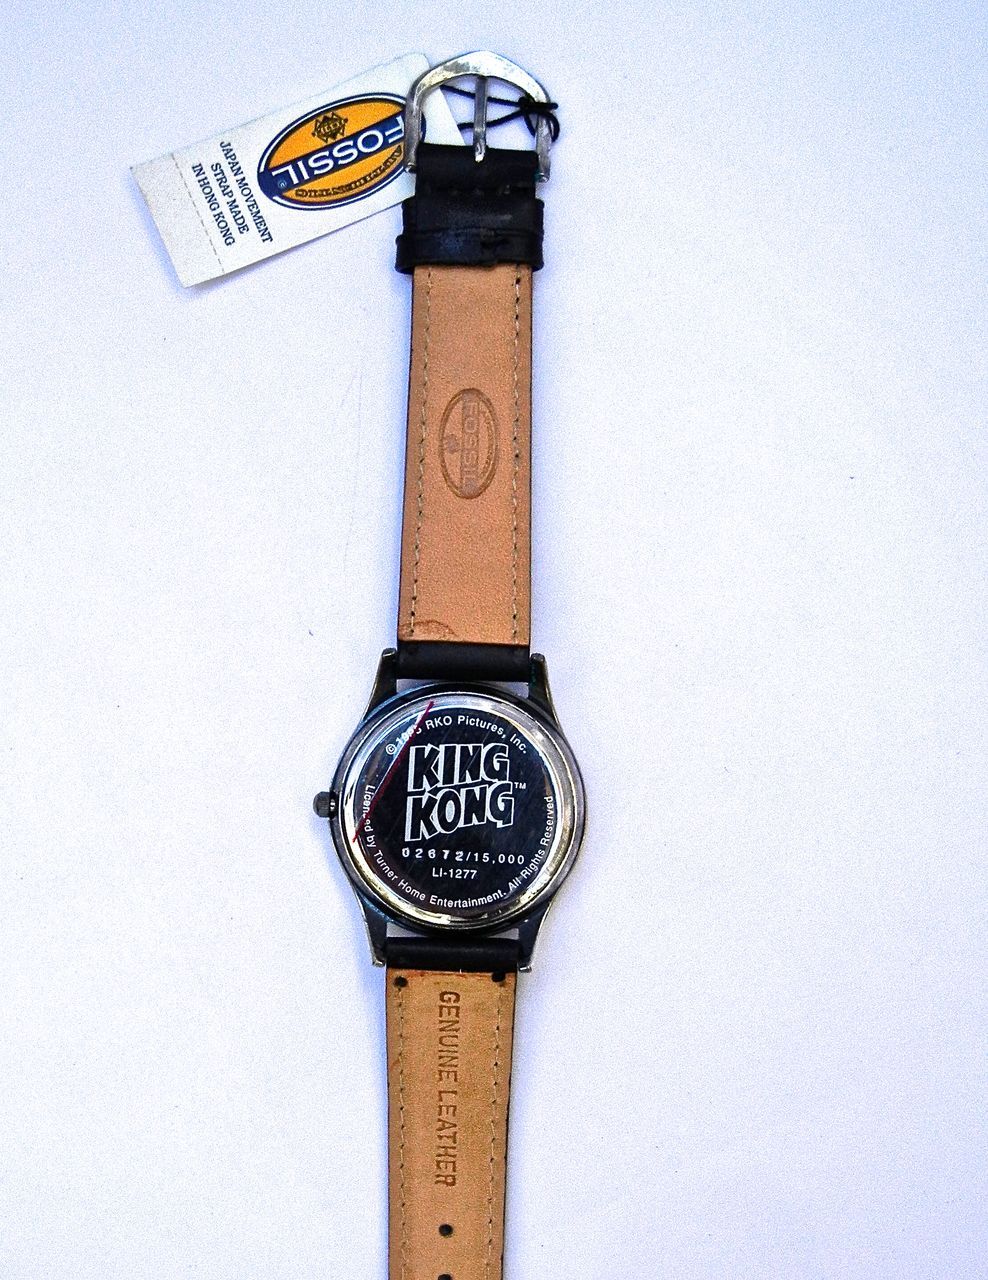 fossil watch serial number location